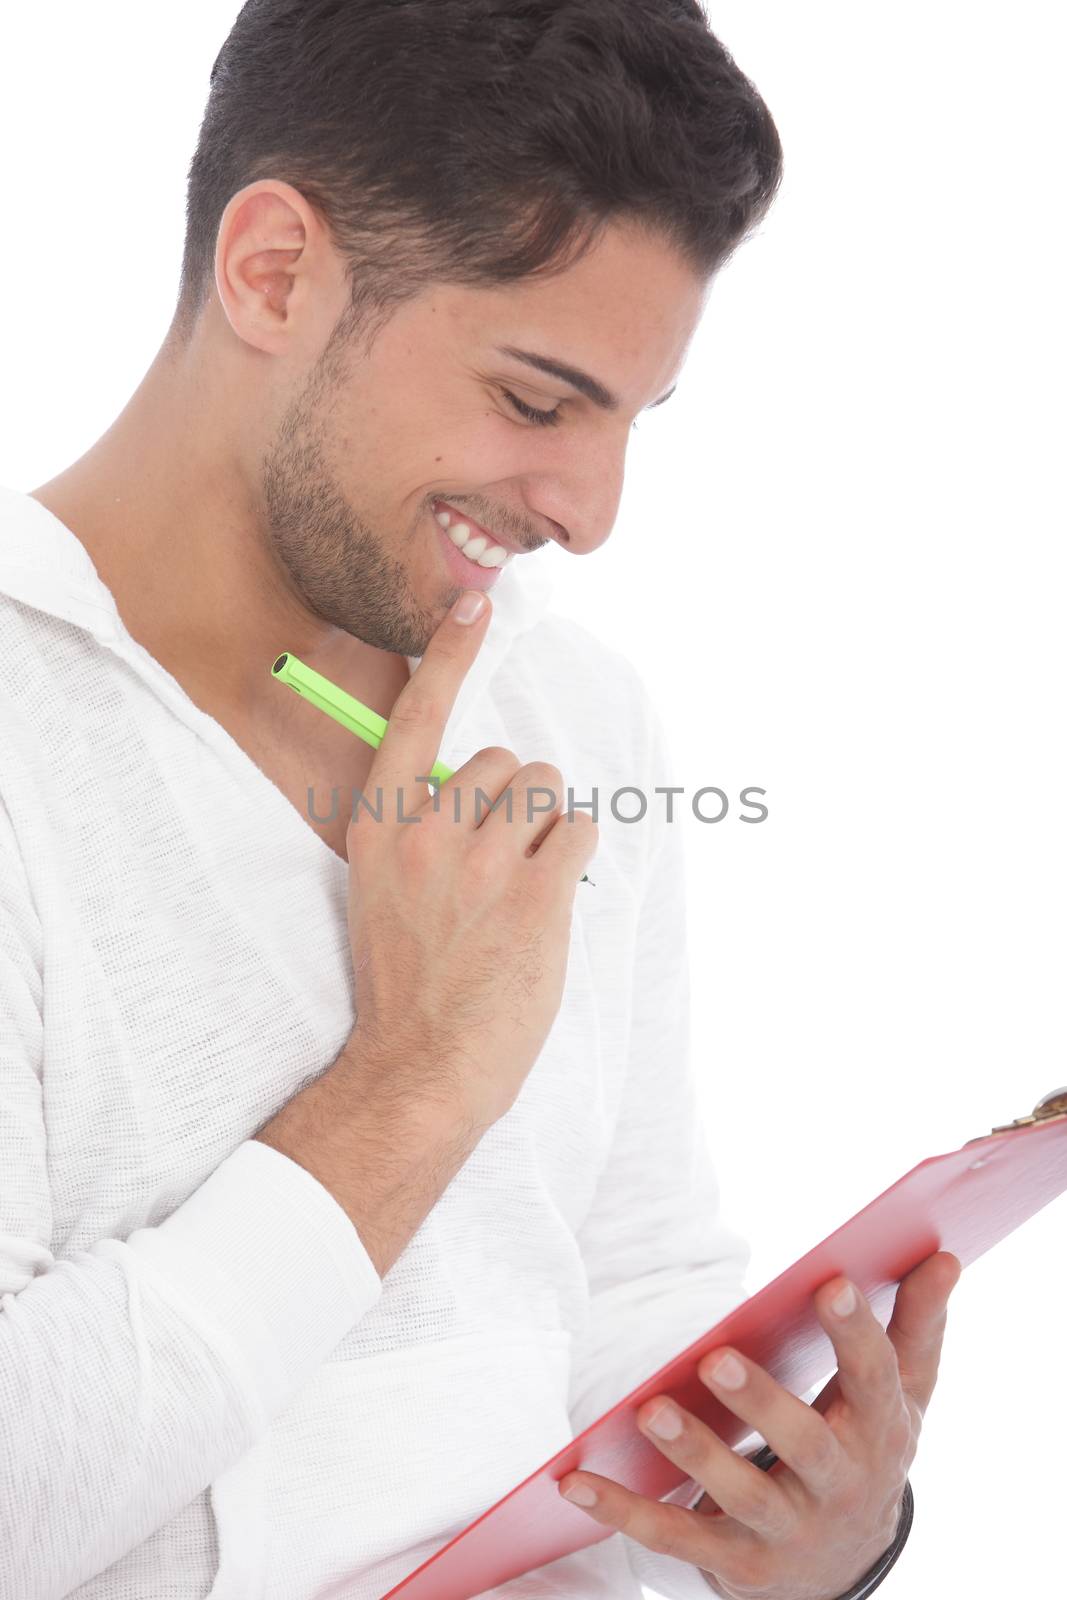 Handsome young man smiling as he reads notes on a clipboard standing with his hand to his chin, isolated on white